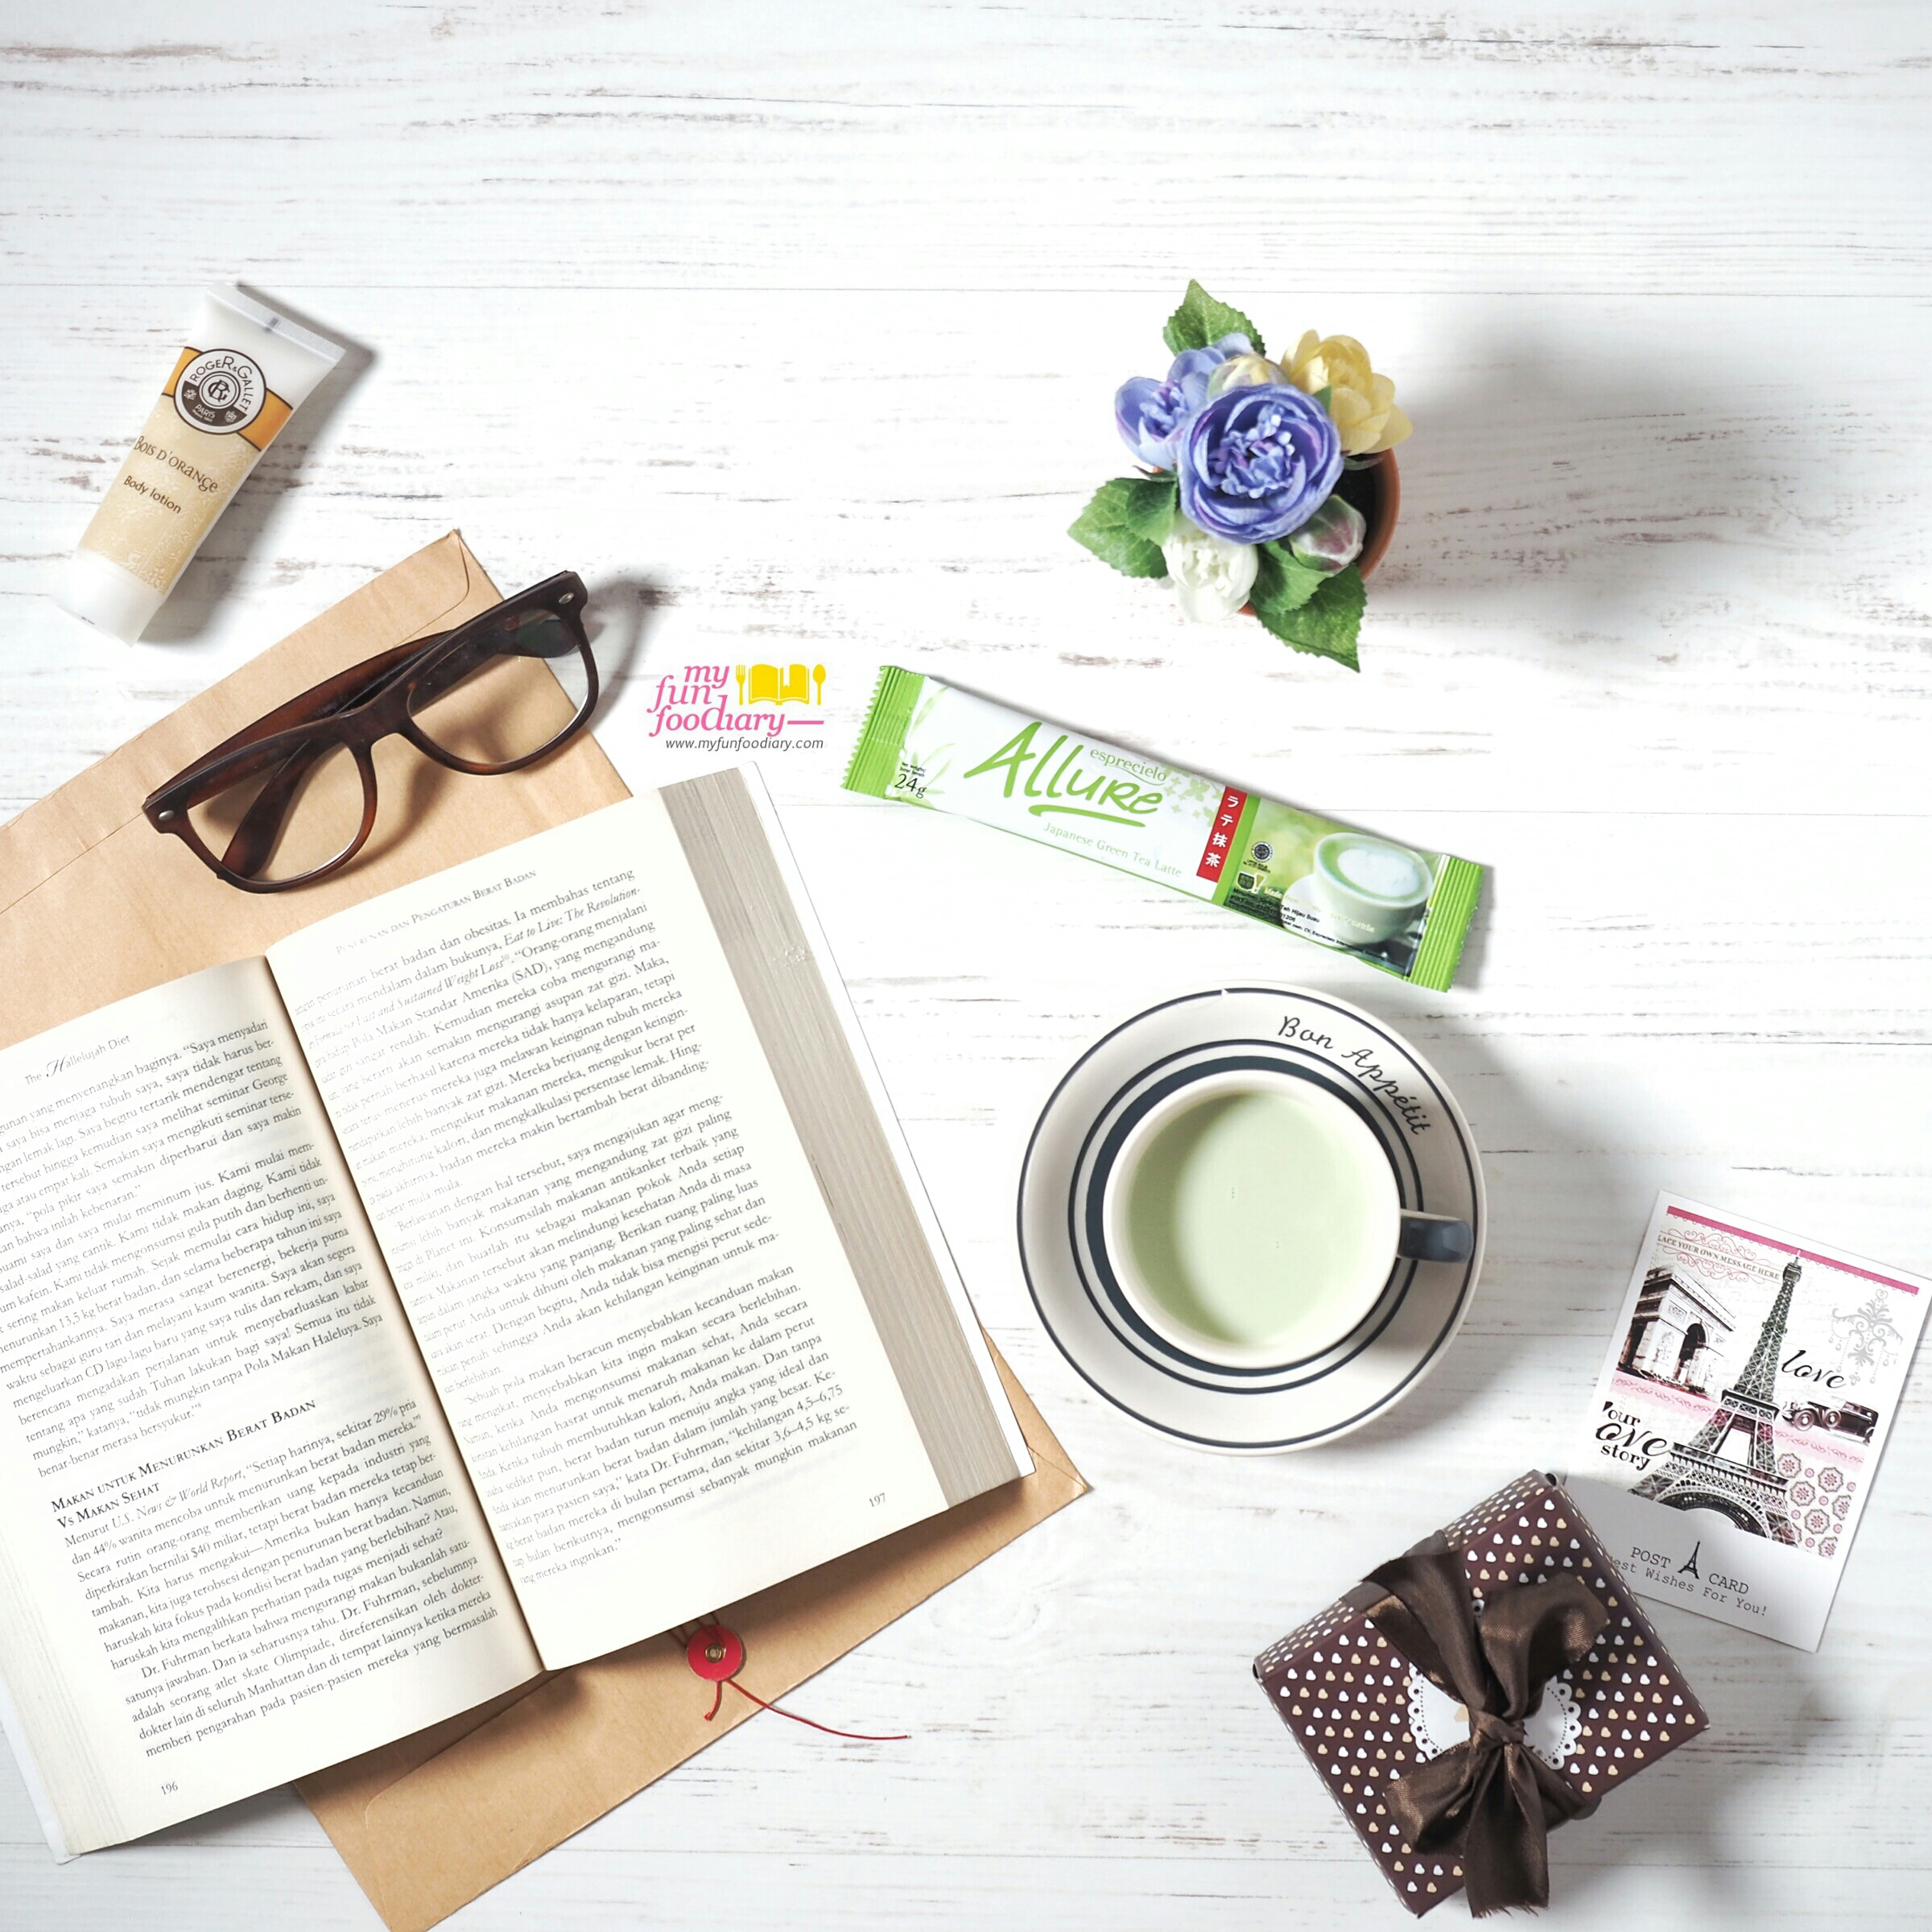 Relaxing Moment with Allure Green Tea at Home by Myfunfoodiary